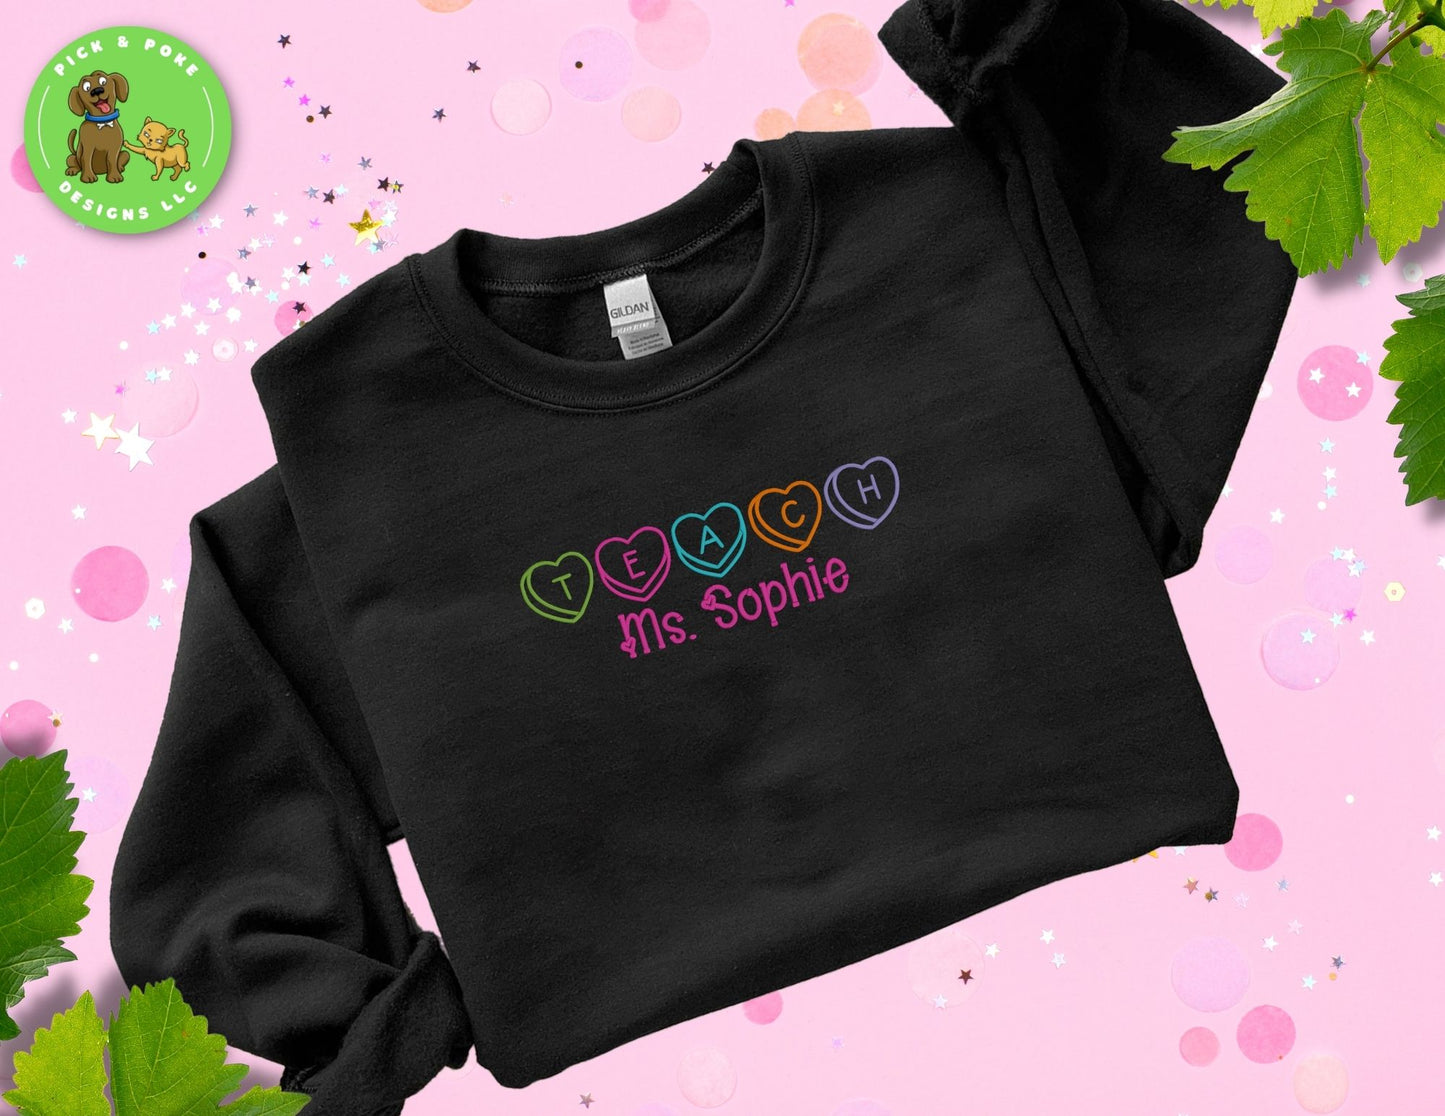 Black Gildan brand crewneck style sweatshirt embroidered with the Word teach and the teacher's name written with hearts. 